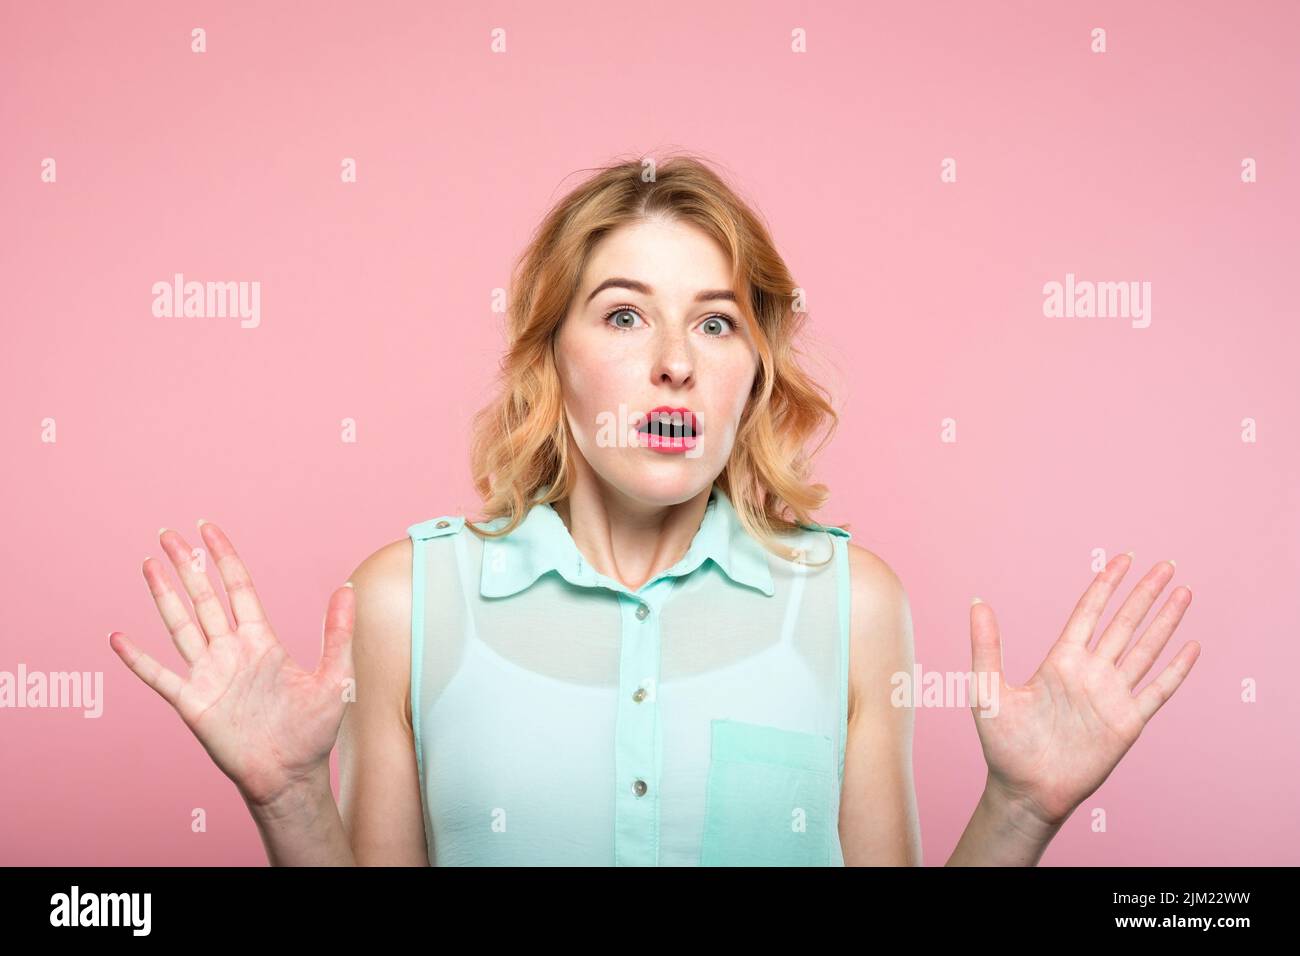 emotion expression overwhelmed shocked woman Stock Photo